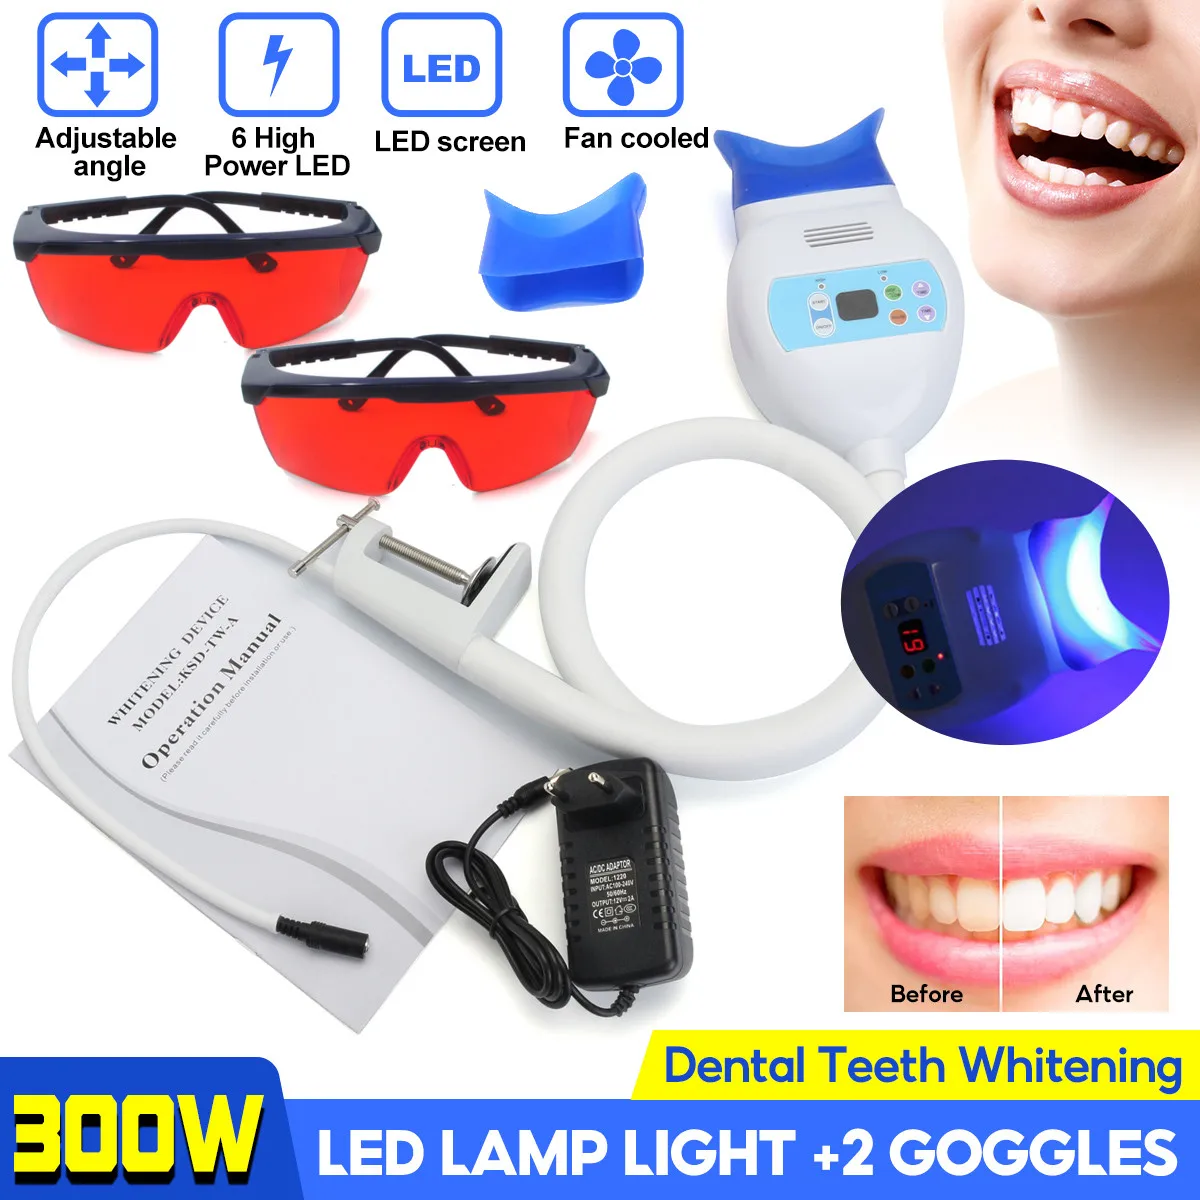 

Chair Dental Equipment Teeth Whitening LED Light Bleaching Accelerator System Use Light Whitening Tooth Lamp Machine + 2 Goggles